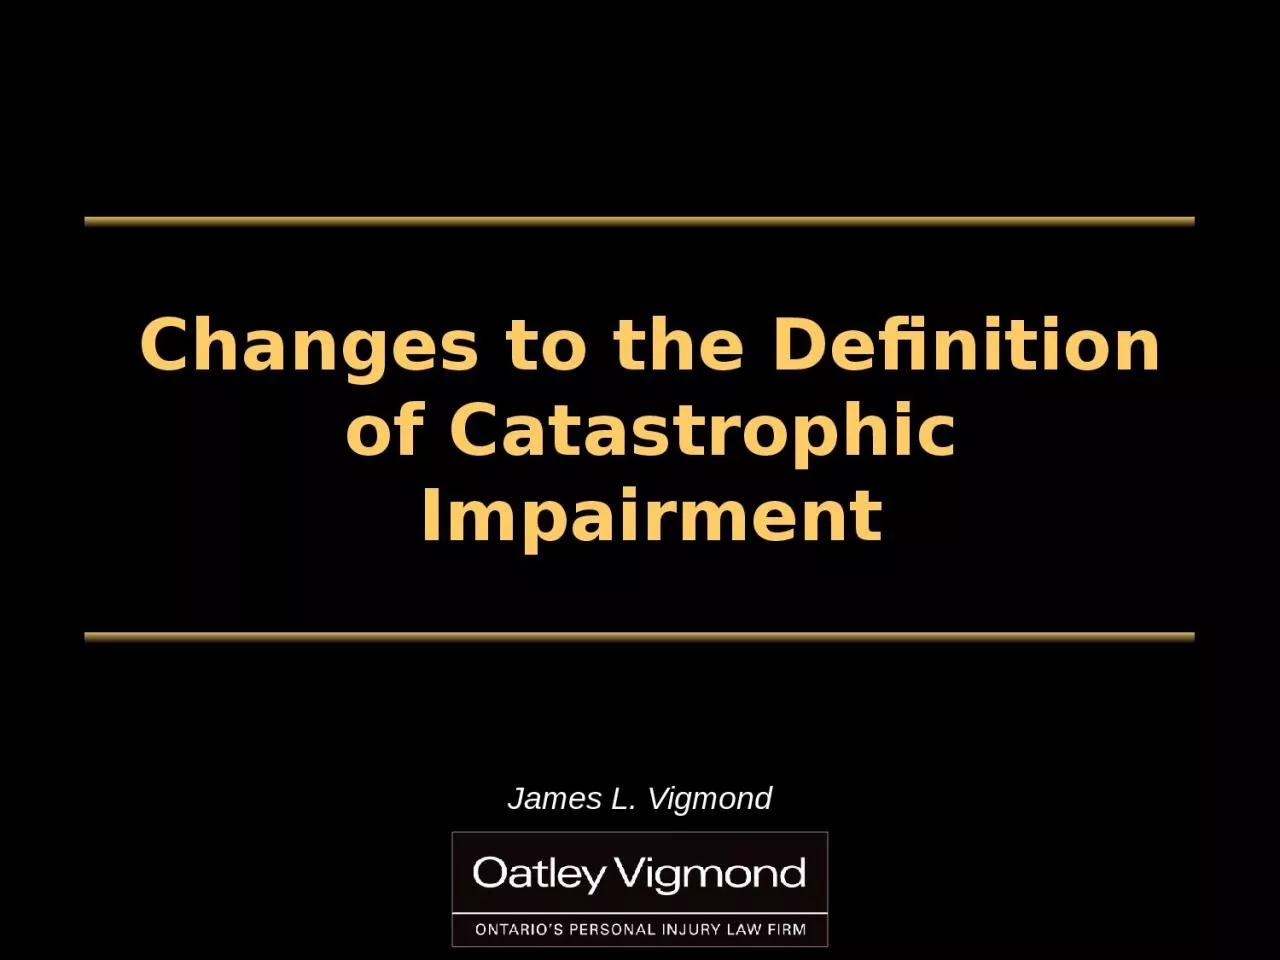 Changes to the Definition of Catastrophic Impairment